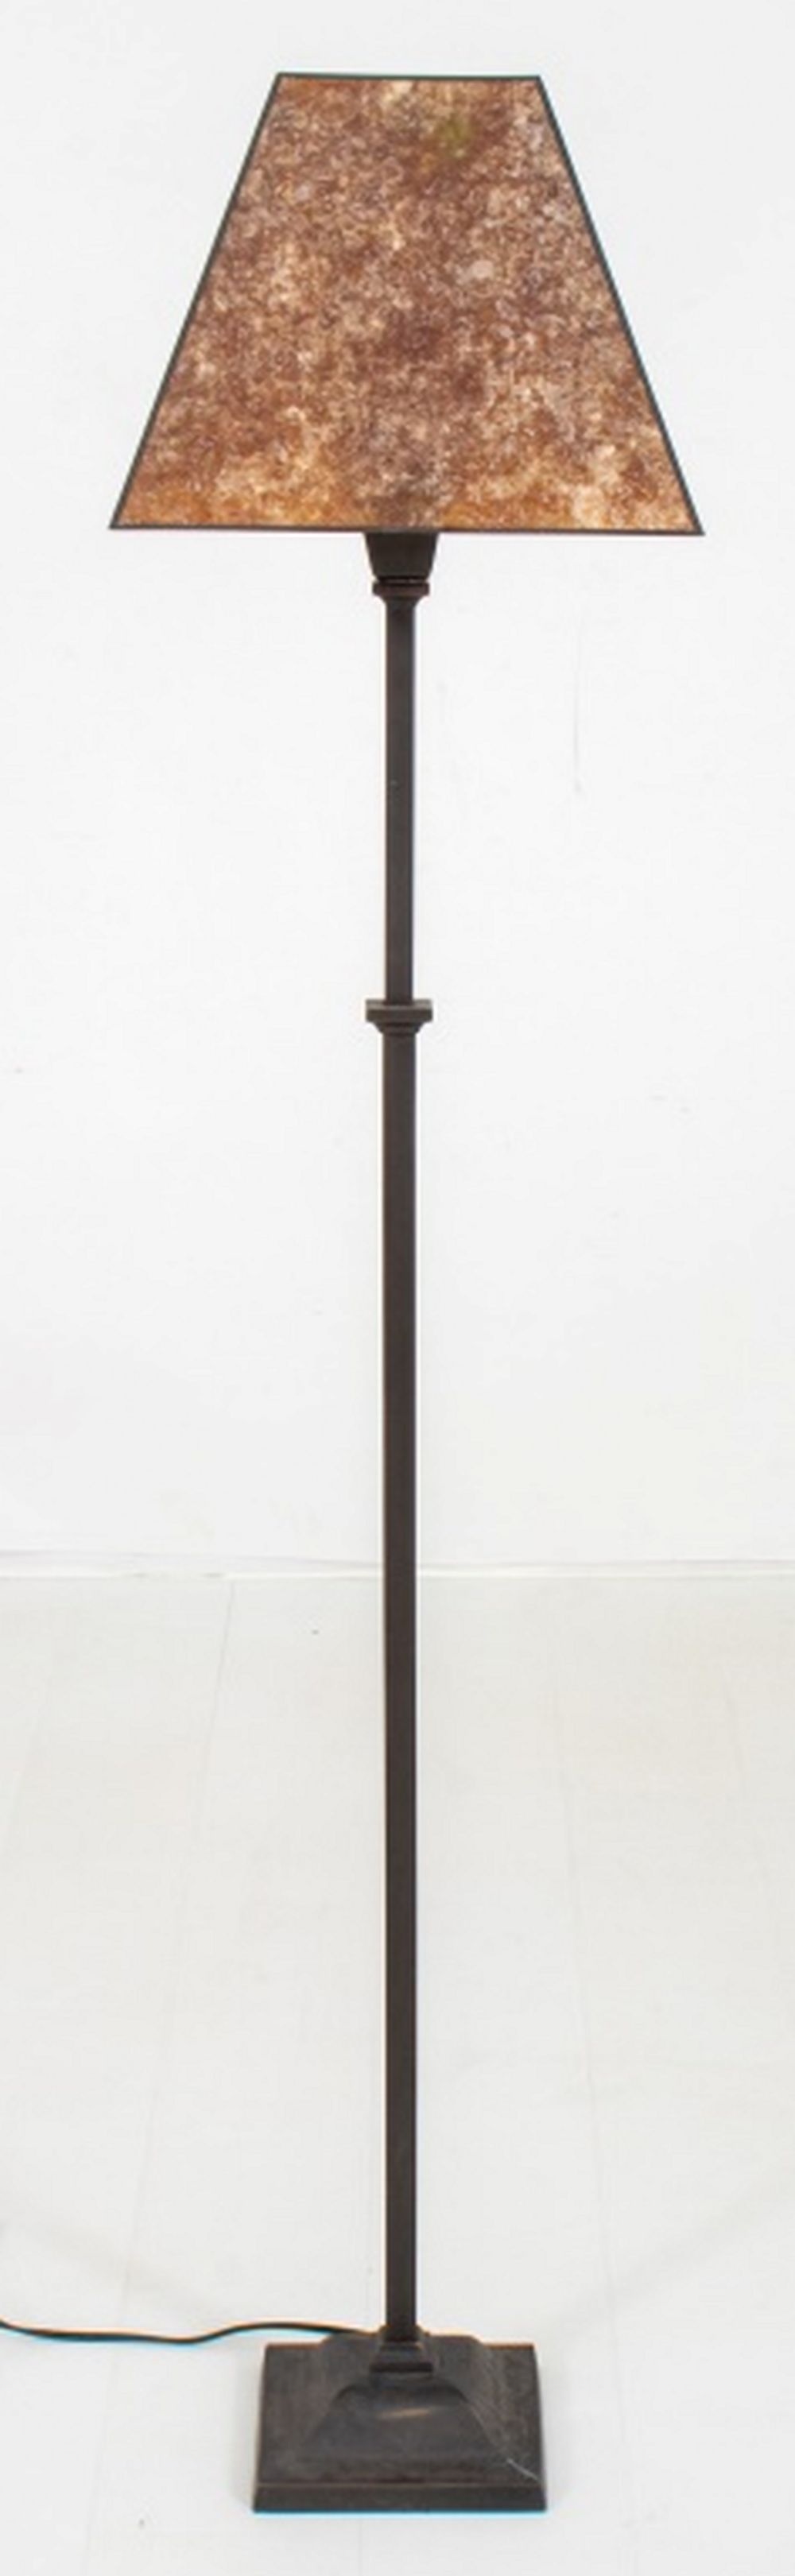 WROUGHT IRON FLOOR LAMP WITH MICA 360001